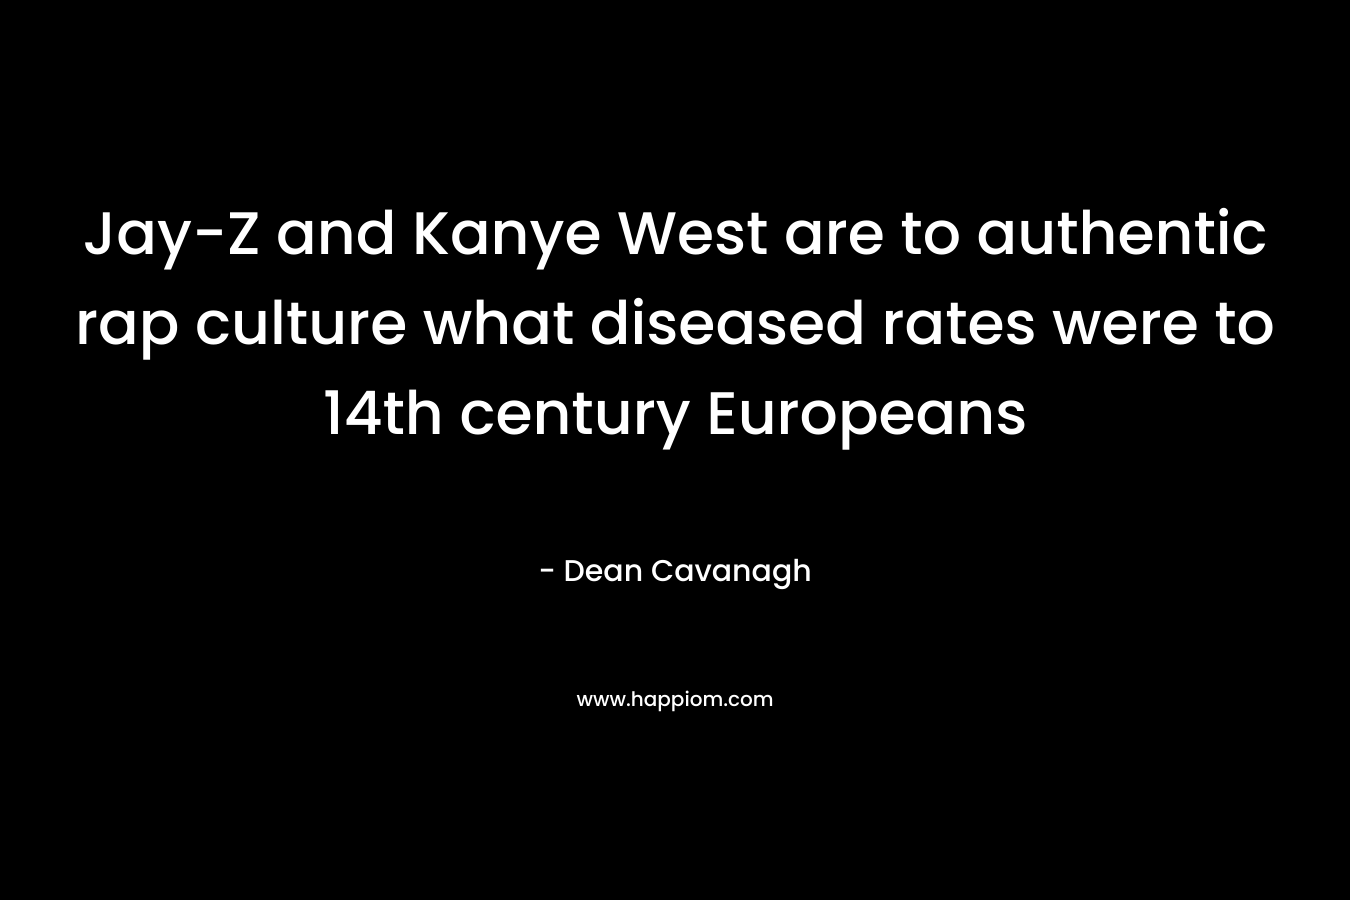 Jay-Z and Kanye West are to authentic rap culture what diseased rates were to 14th century Europeans